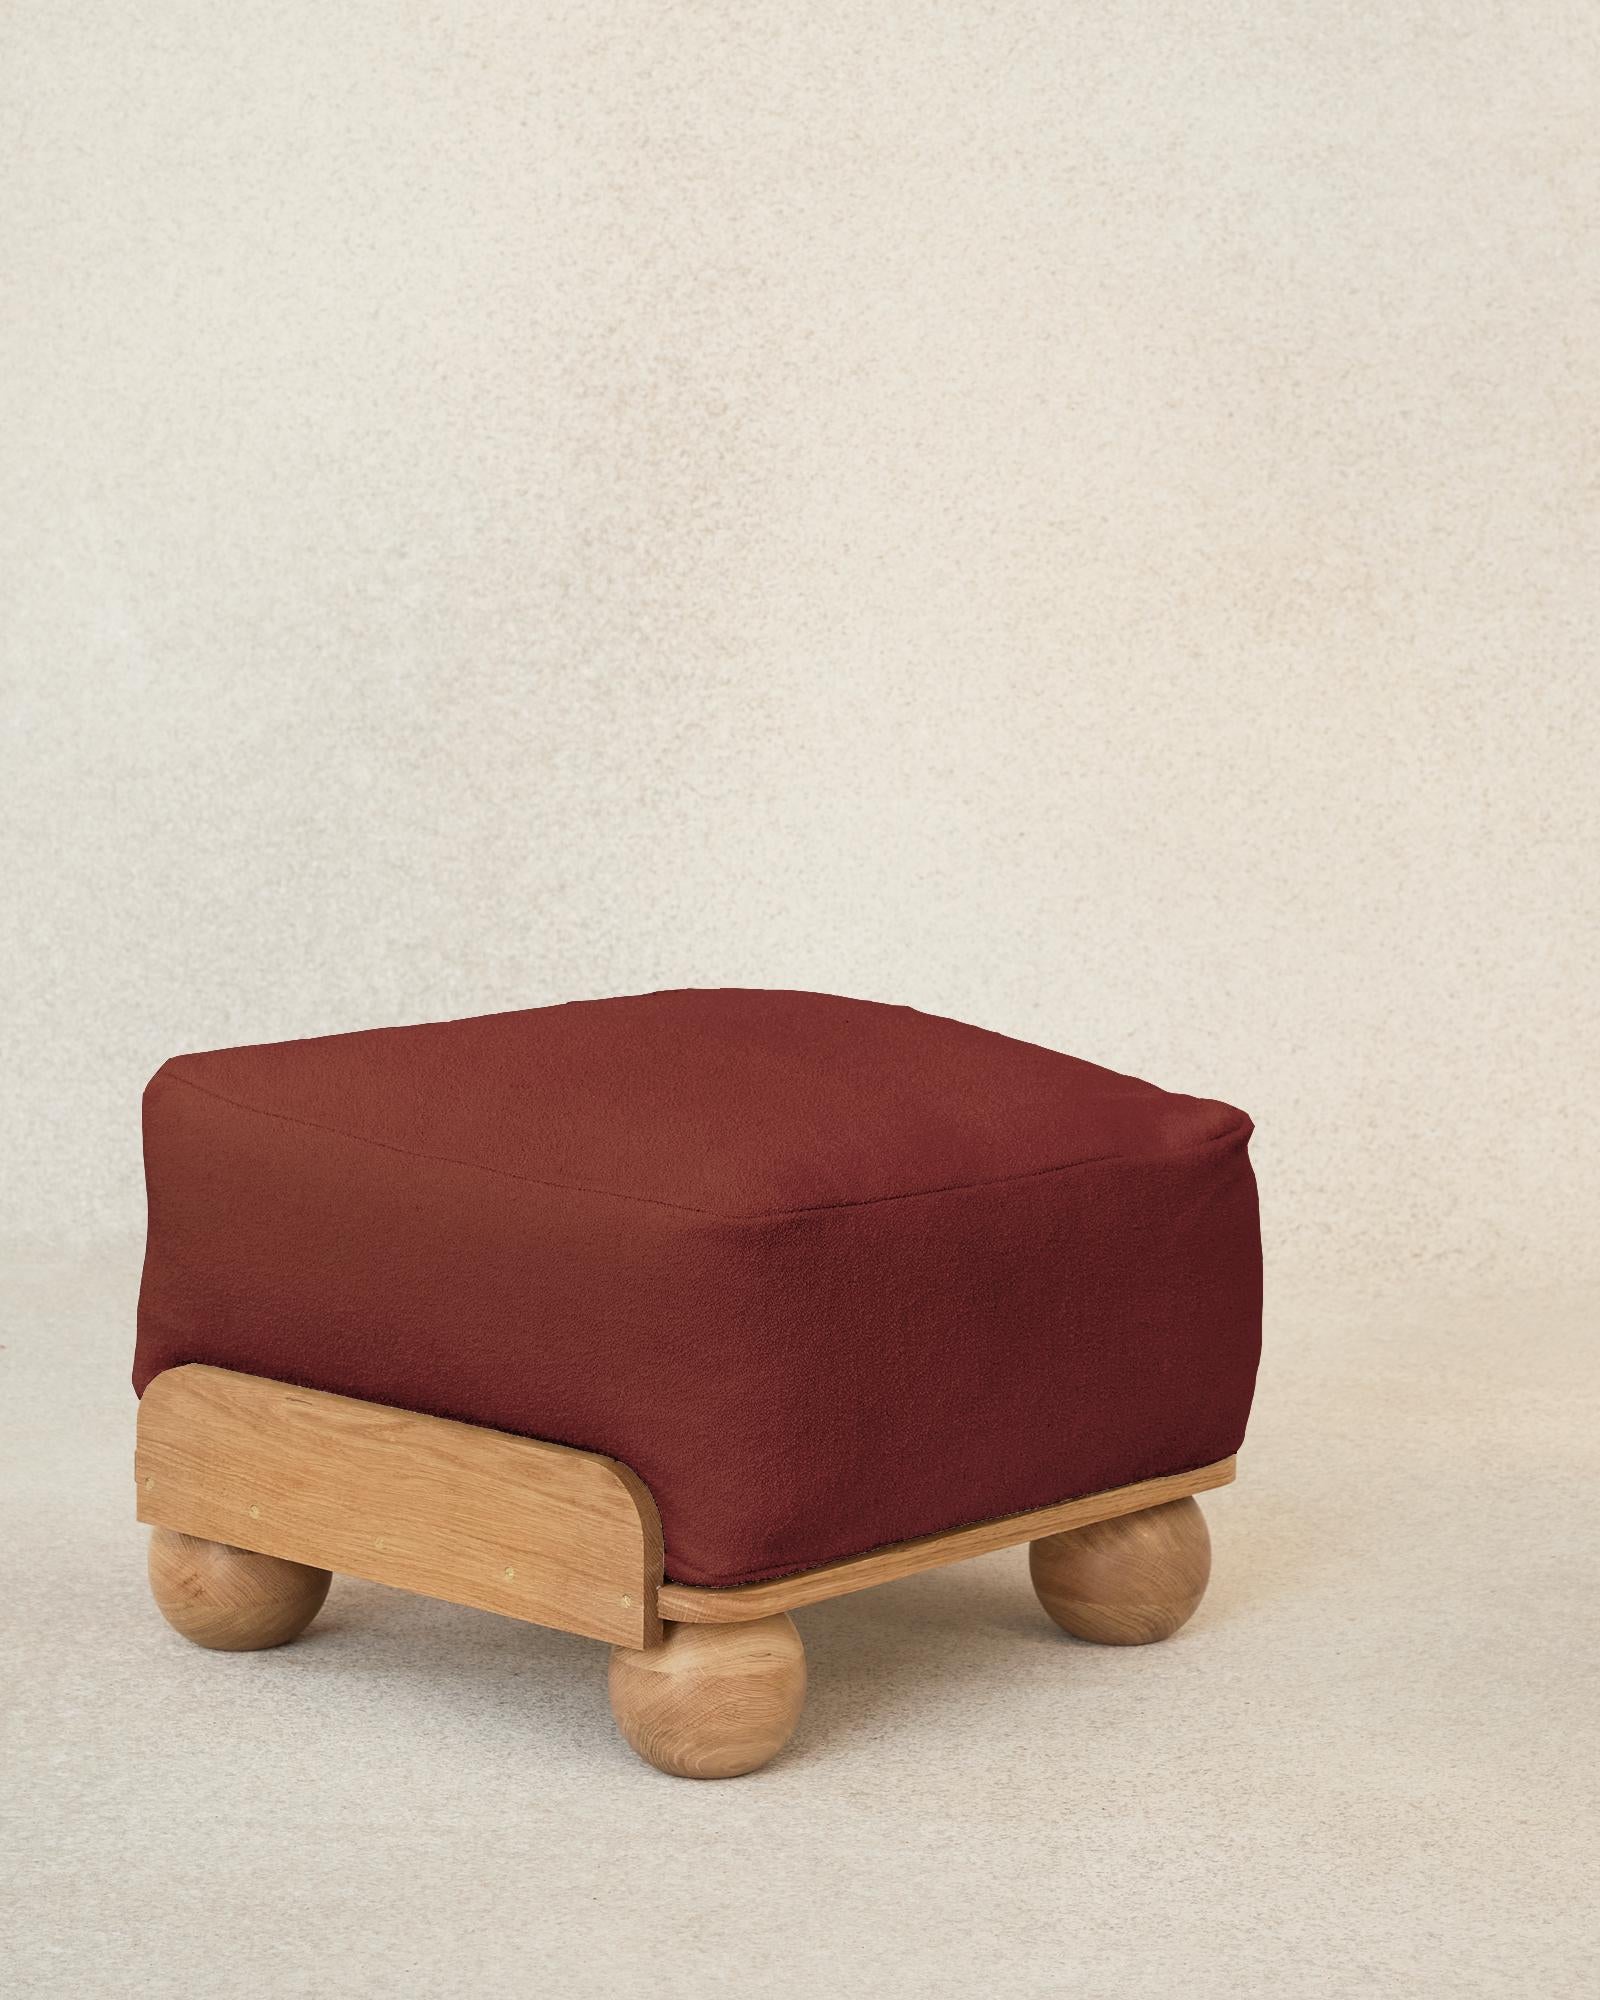 The Cove footstool is a simple, arm- and backless seat to put your feet up. The Cove footstool can be combined into a daybed of any length or paired with the Cove slipper or armchair to make a chaise.

Like its Cove siblings, the Footstool reveals